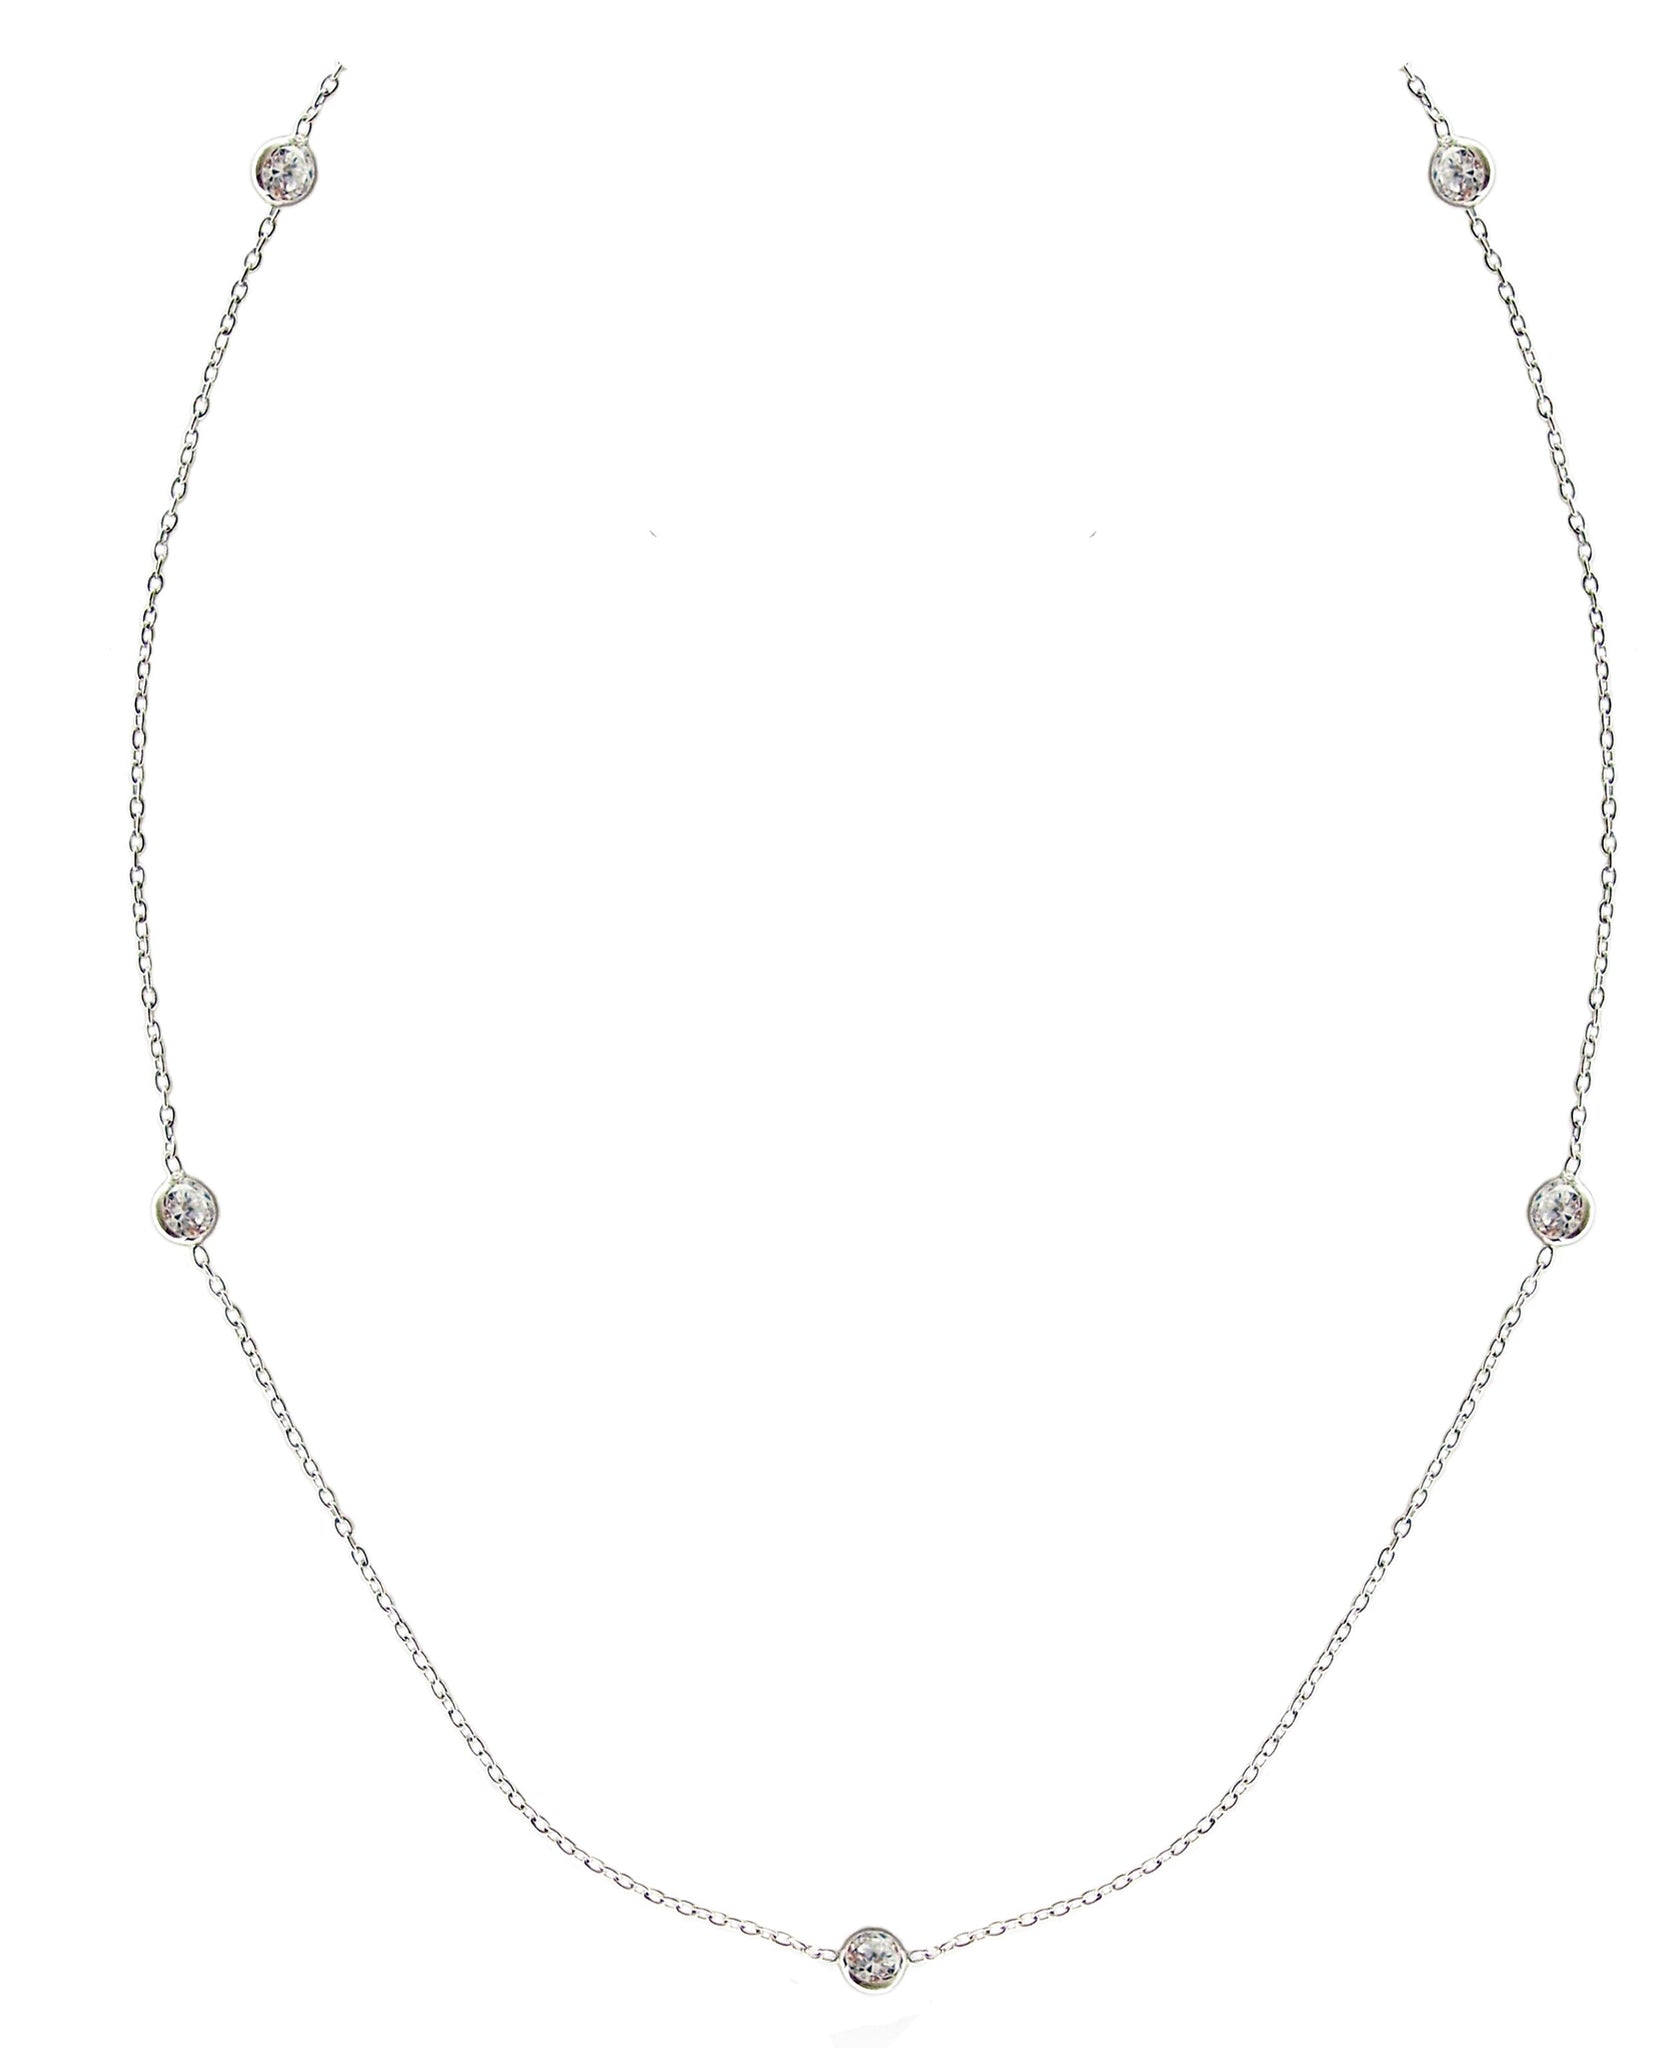 Zirconite by the cubic inch necklace sterling silver